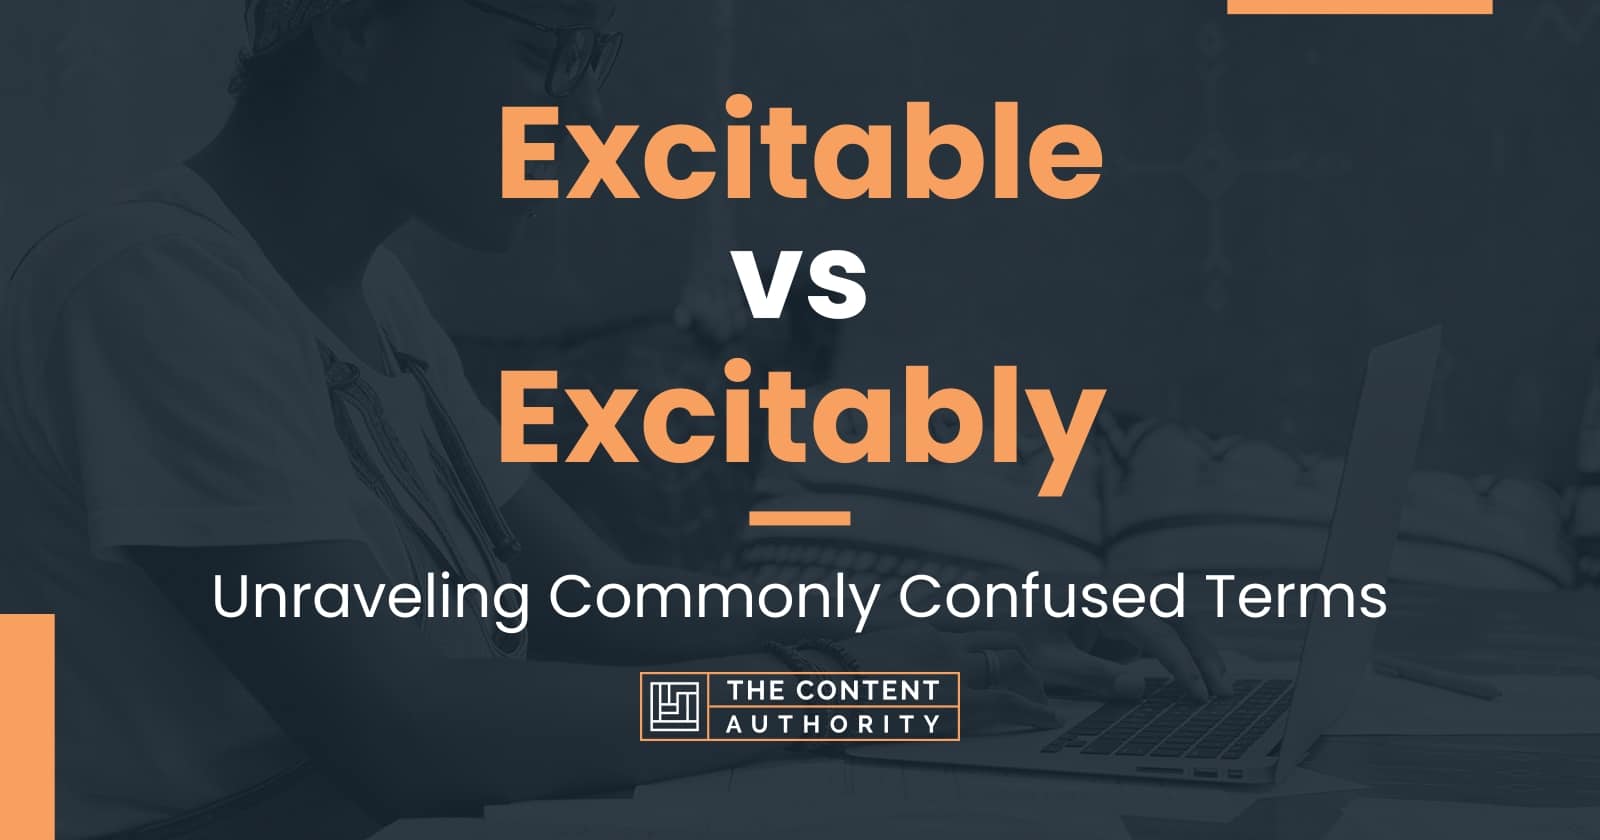 Excitable Vs Excitably Meaning And Differences